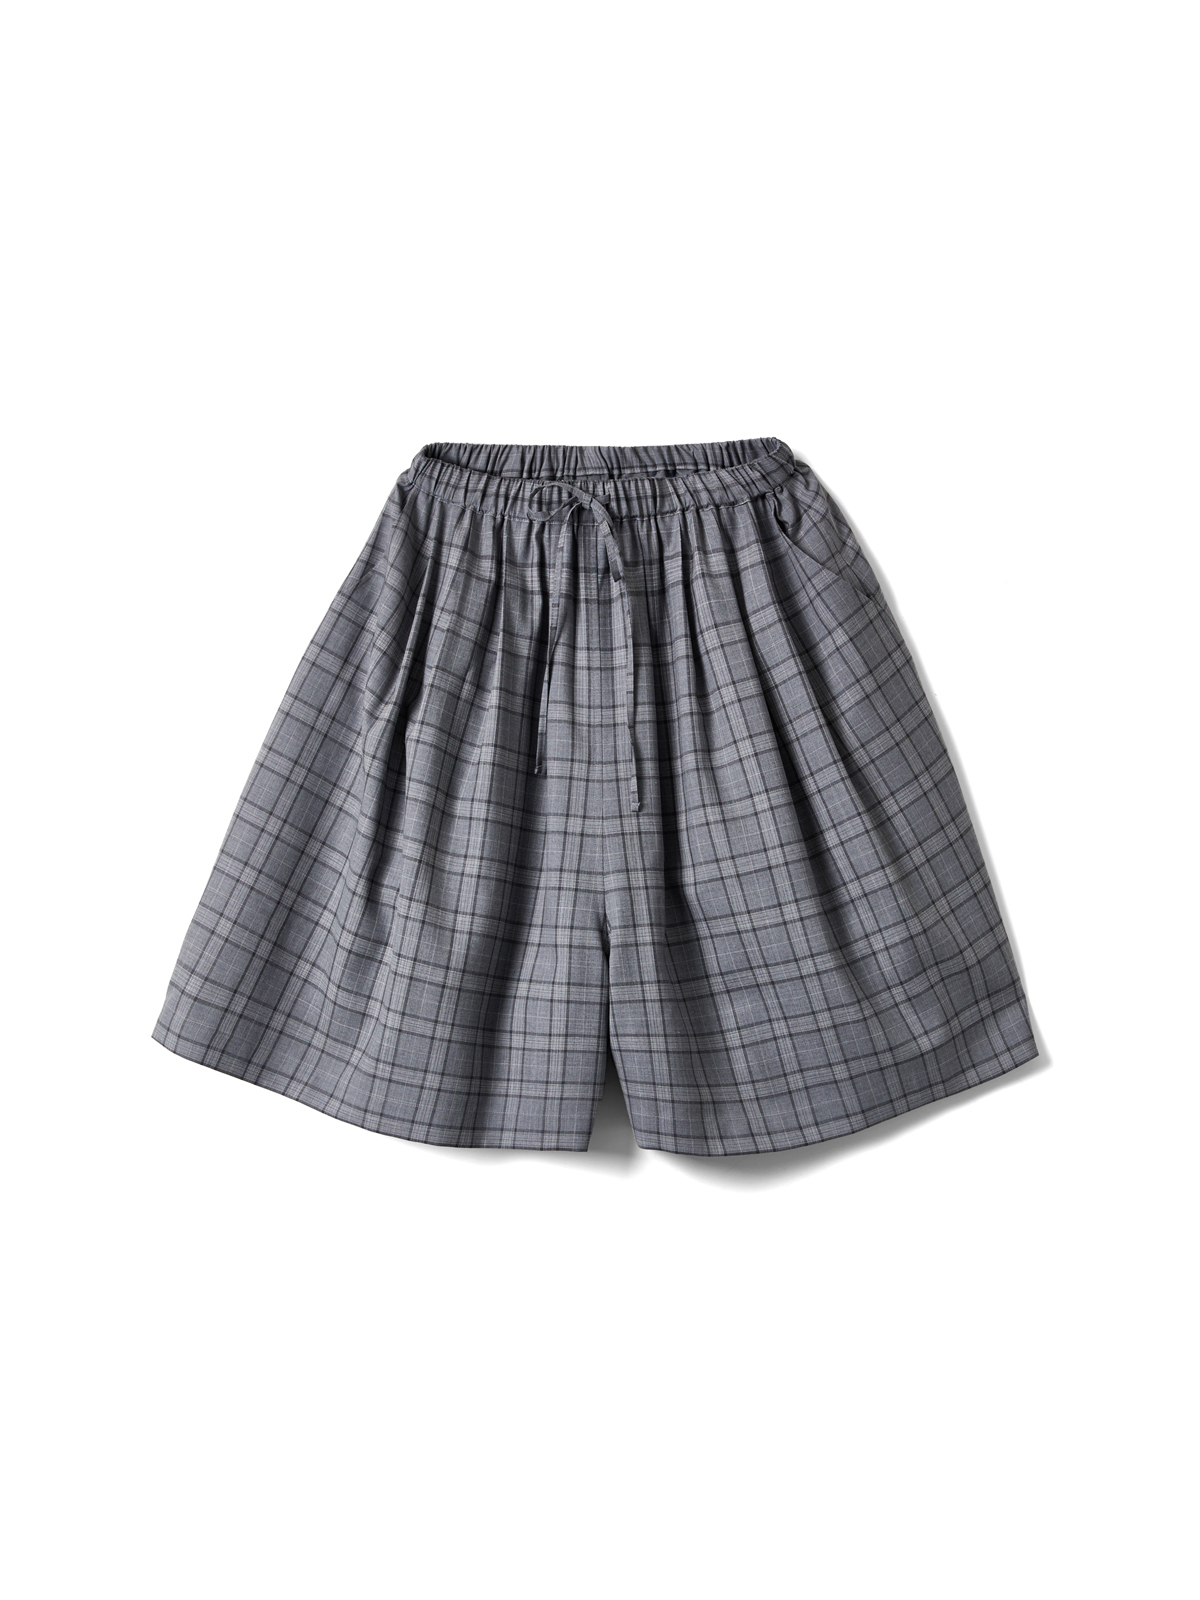 WIDEWIDEWIDE PANTS (GRAY CHECK)